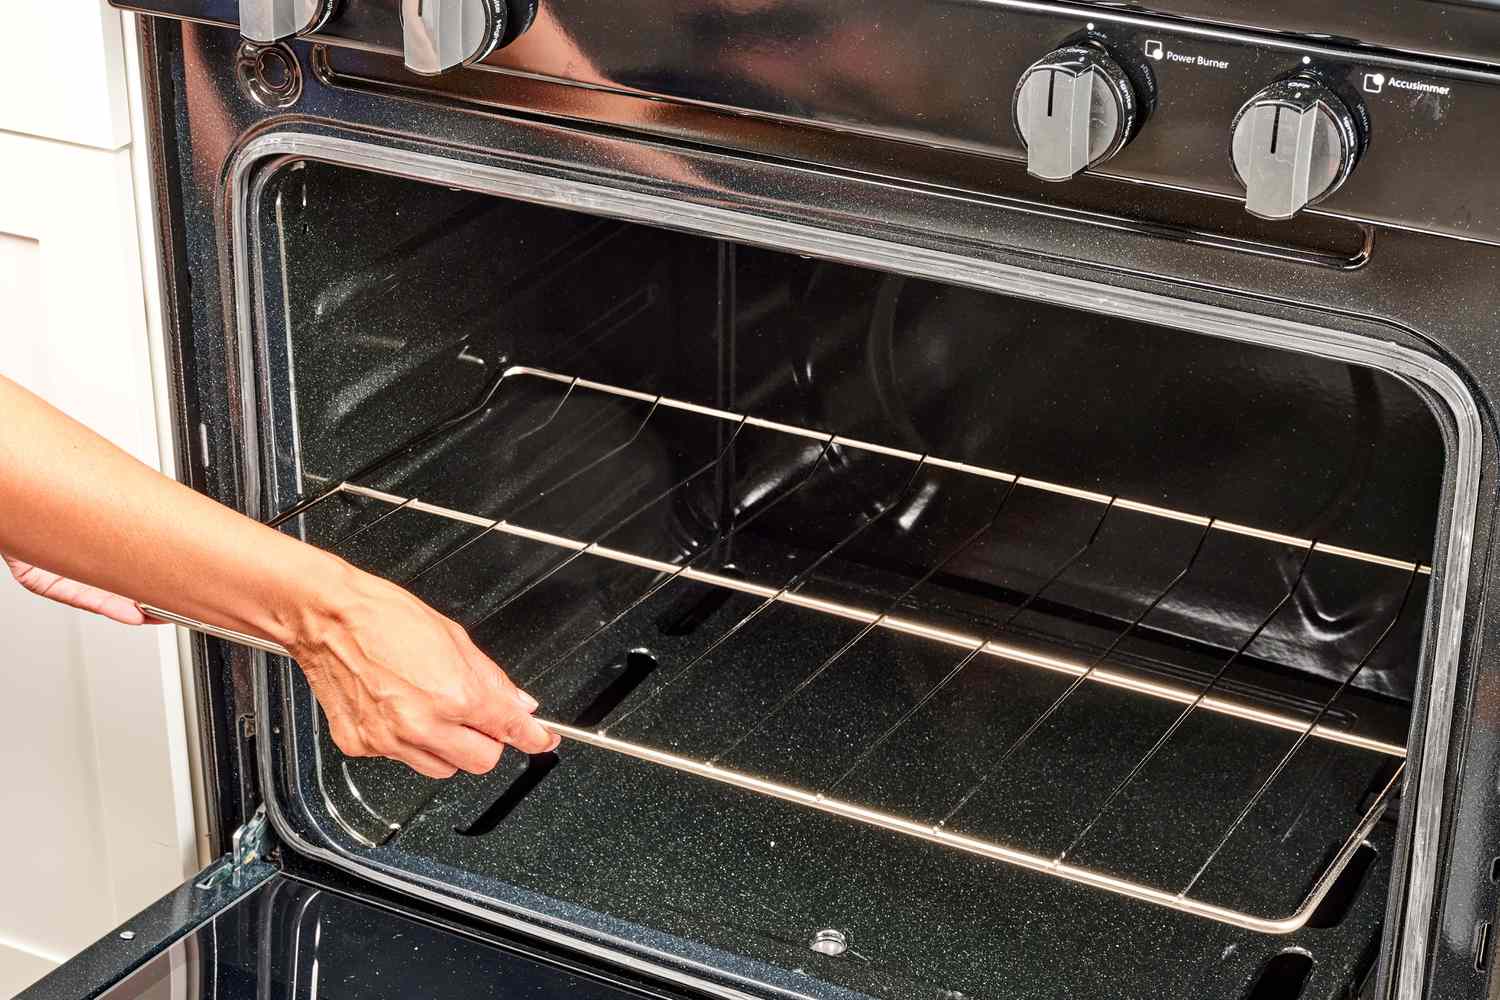 Oven racks inserted back into gas oven